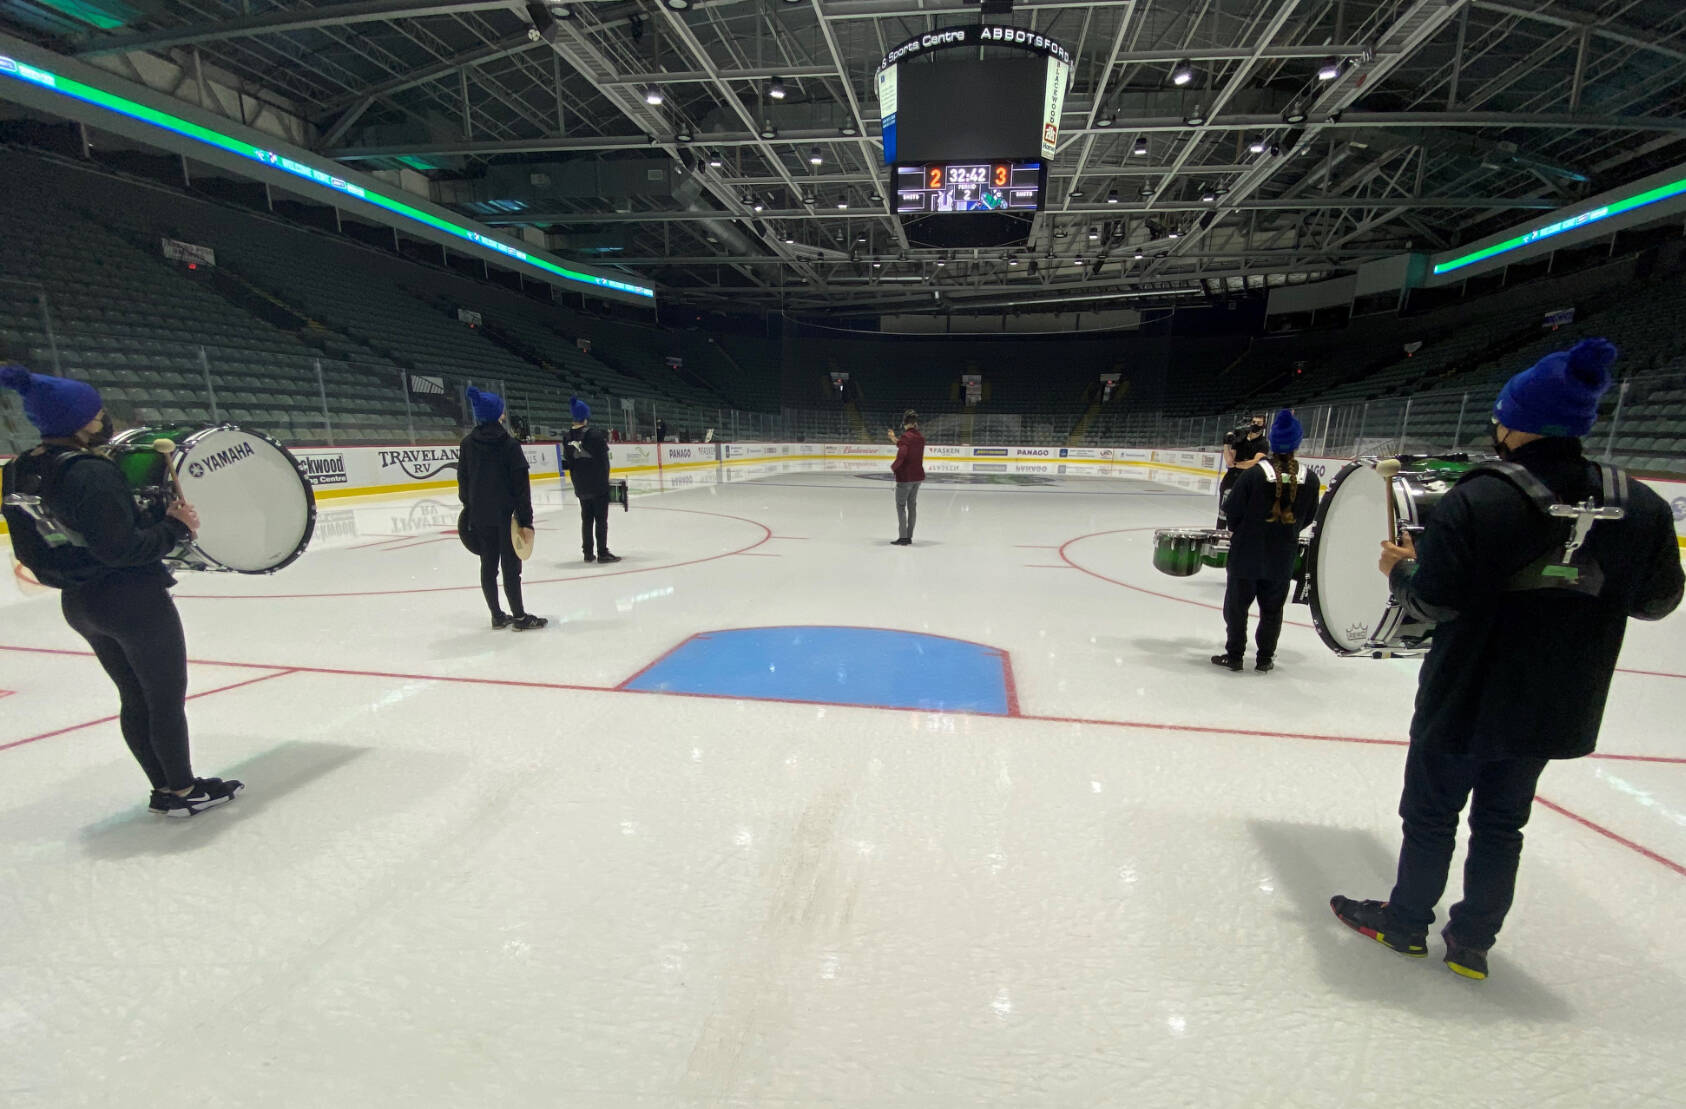 Members of the Sardis Drumline on the ice at an empty Abbotsford Centre prior to Friday night’s American Hockey League game. (submitted photo)